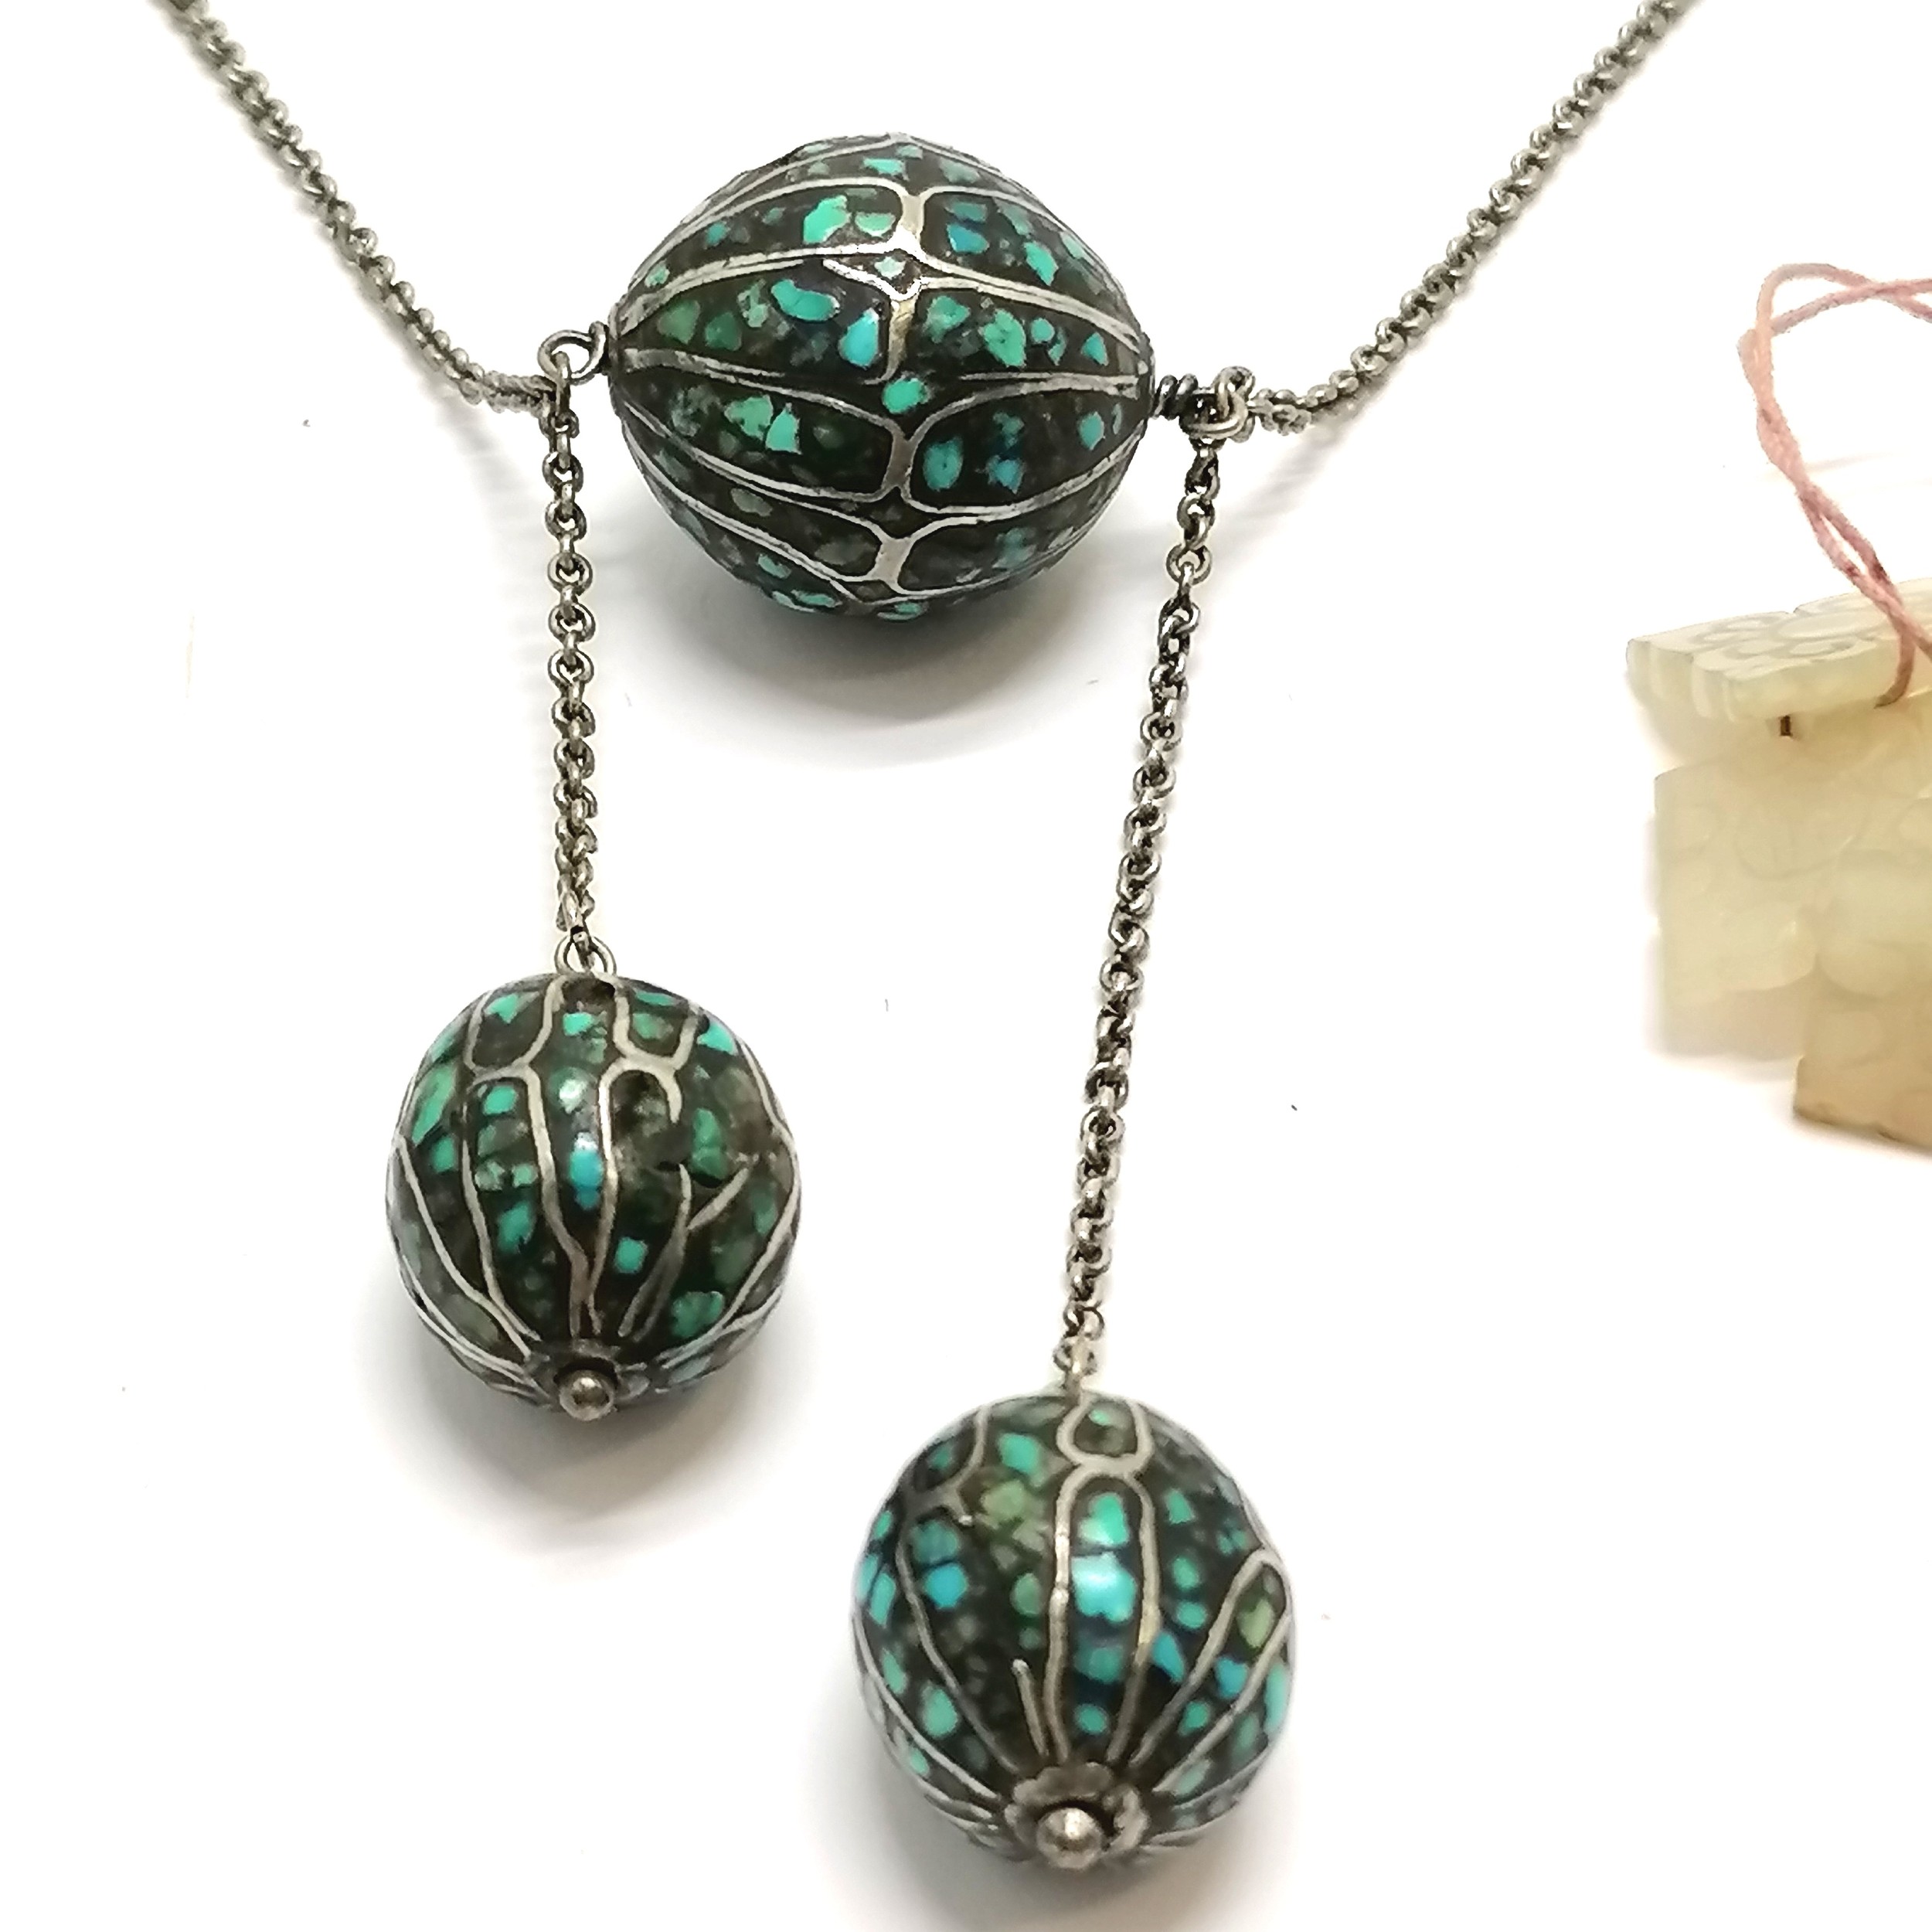 5 x hand carved jade Chinese buttons (1.2cm square), Unmarked silver & turquoise set bead necklace - Image 3 of 5